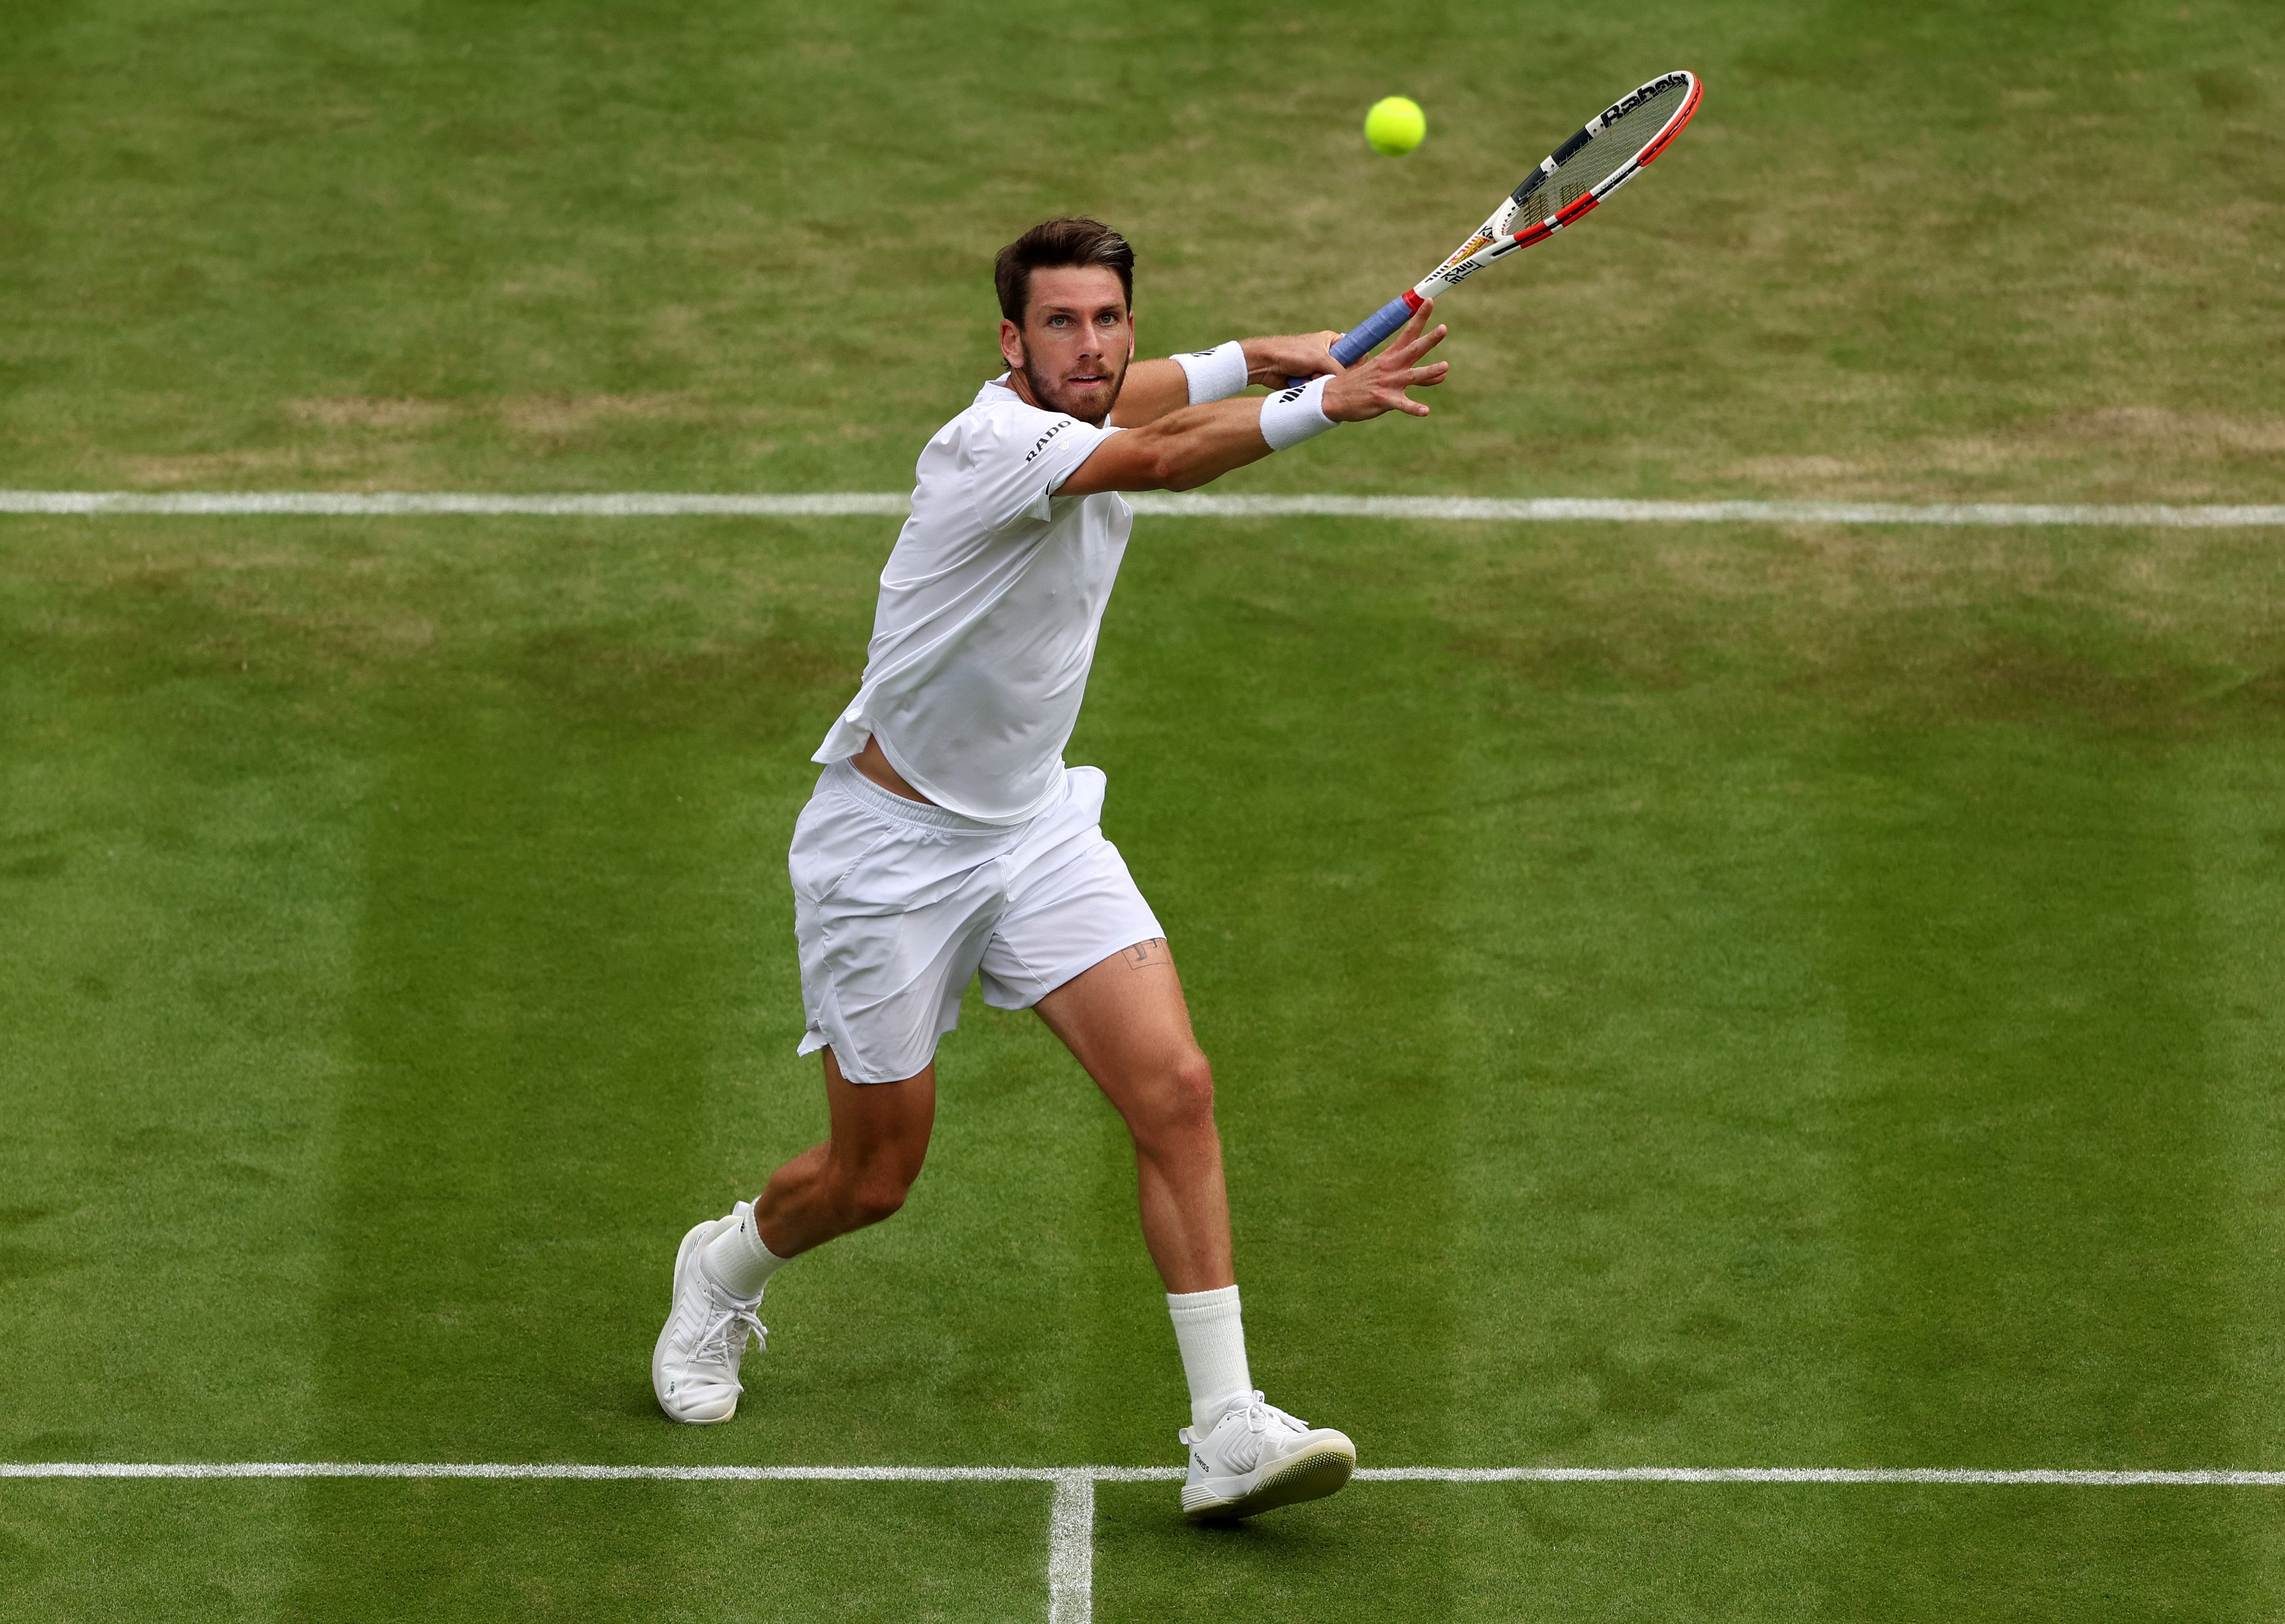 Cameron Norrie of Great Britain plays a forehand against Jaume Munar of Spain during their Men's Singles Second Round match on day three of The Championships Wimbledon 2022 at All England Lawn Tennis and Croquet Club on June 29, 2022 in London, England.